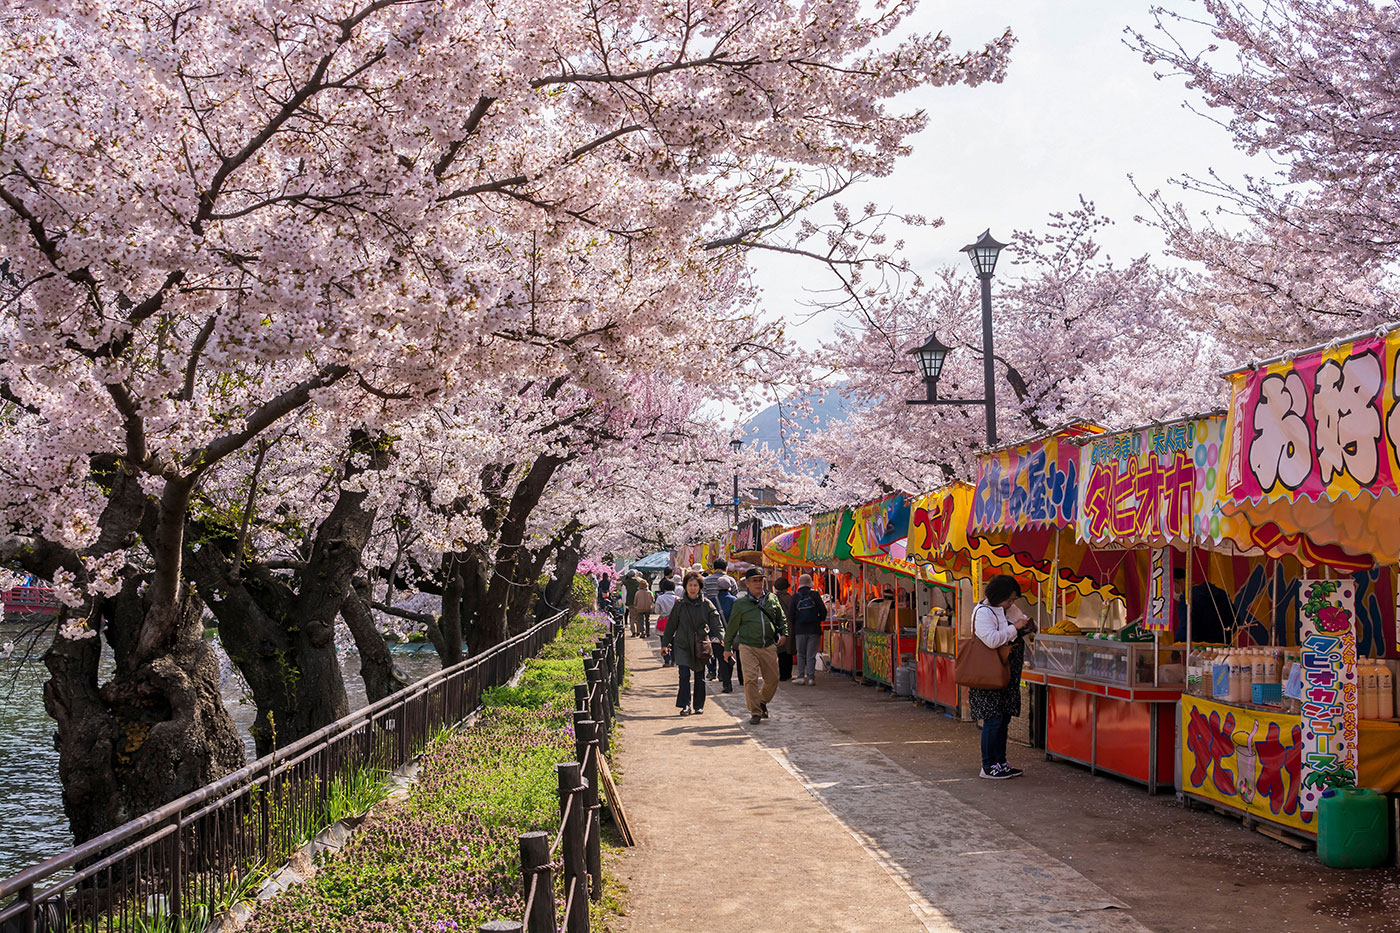 The Best Time To Celebrate Cherry Blossom Season in Japan - Travel Noire